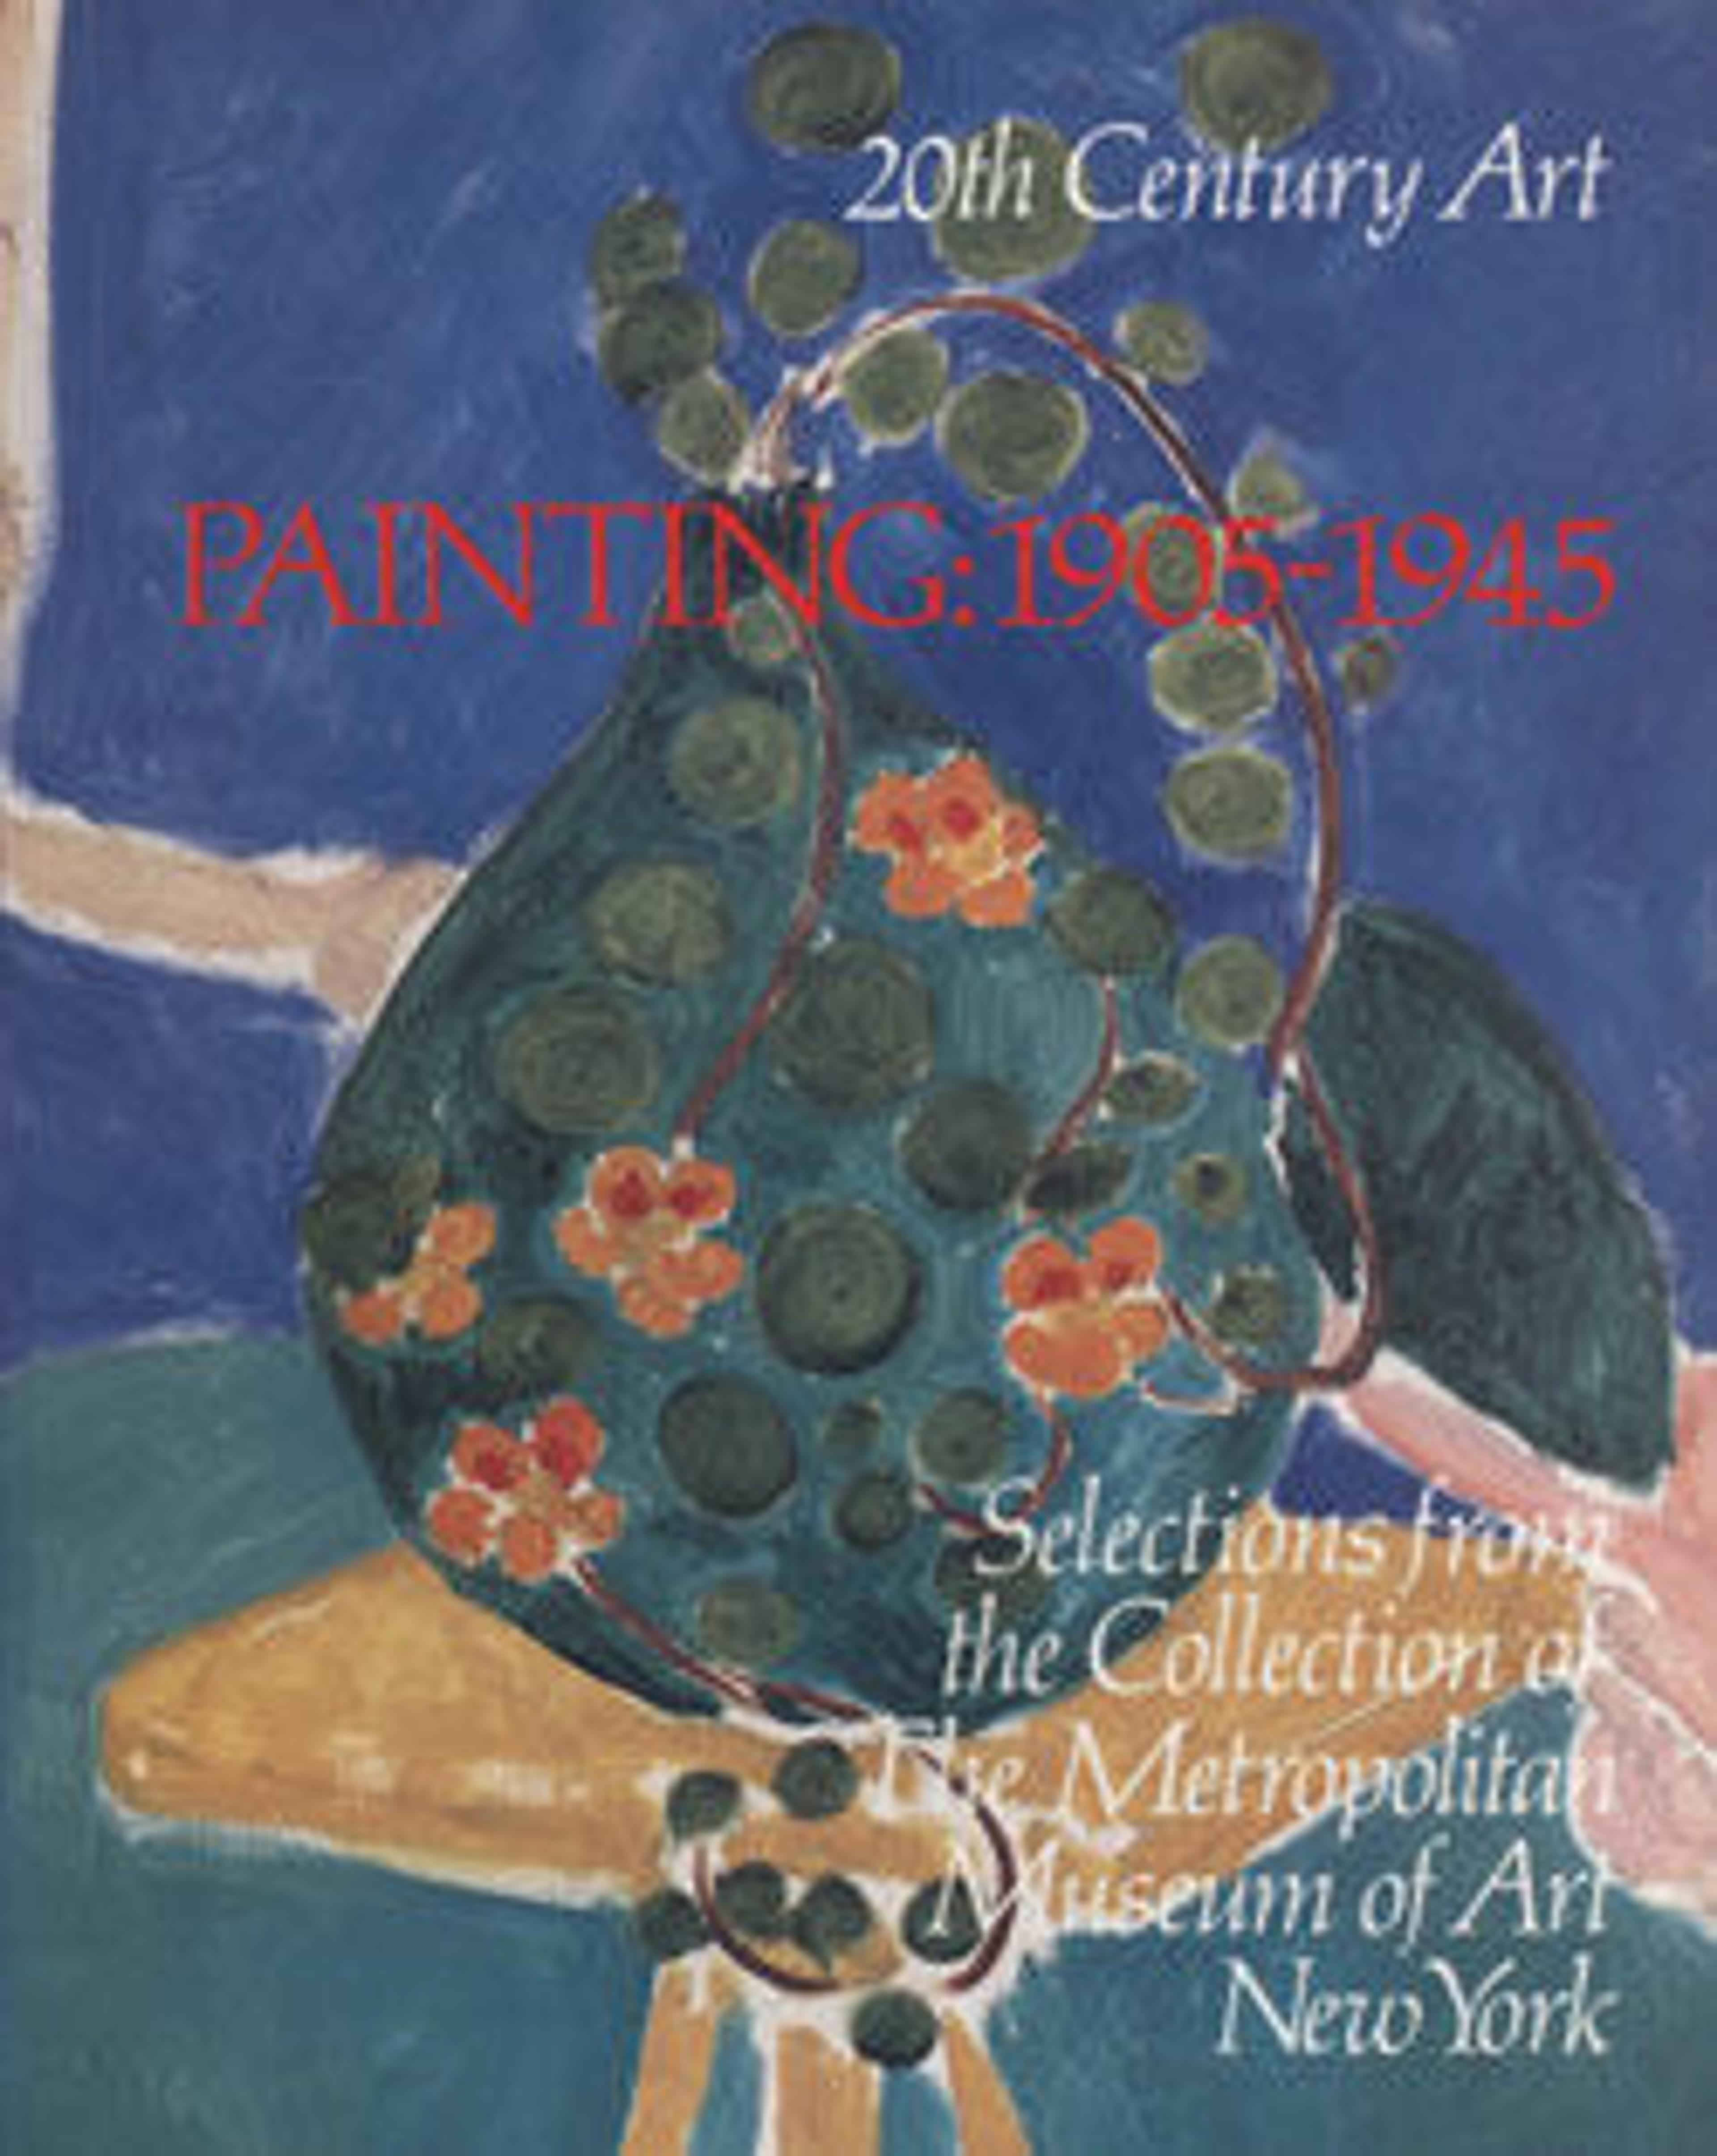 Twentieth-Century Art: Selections from the Collection of The Metropolitan Museum of Art. Vol. 1, Painting, 1905-1945